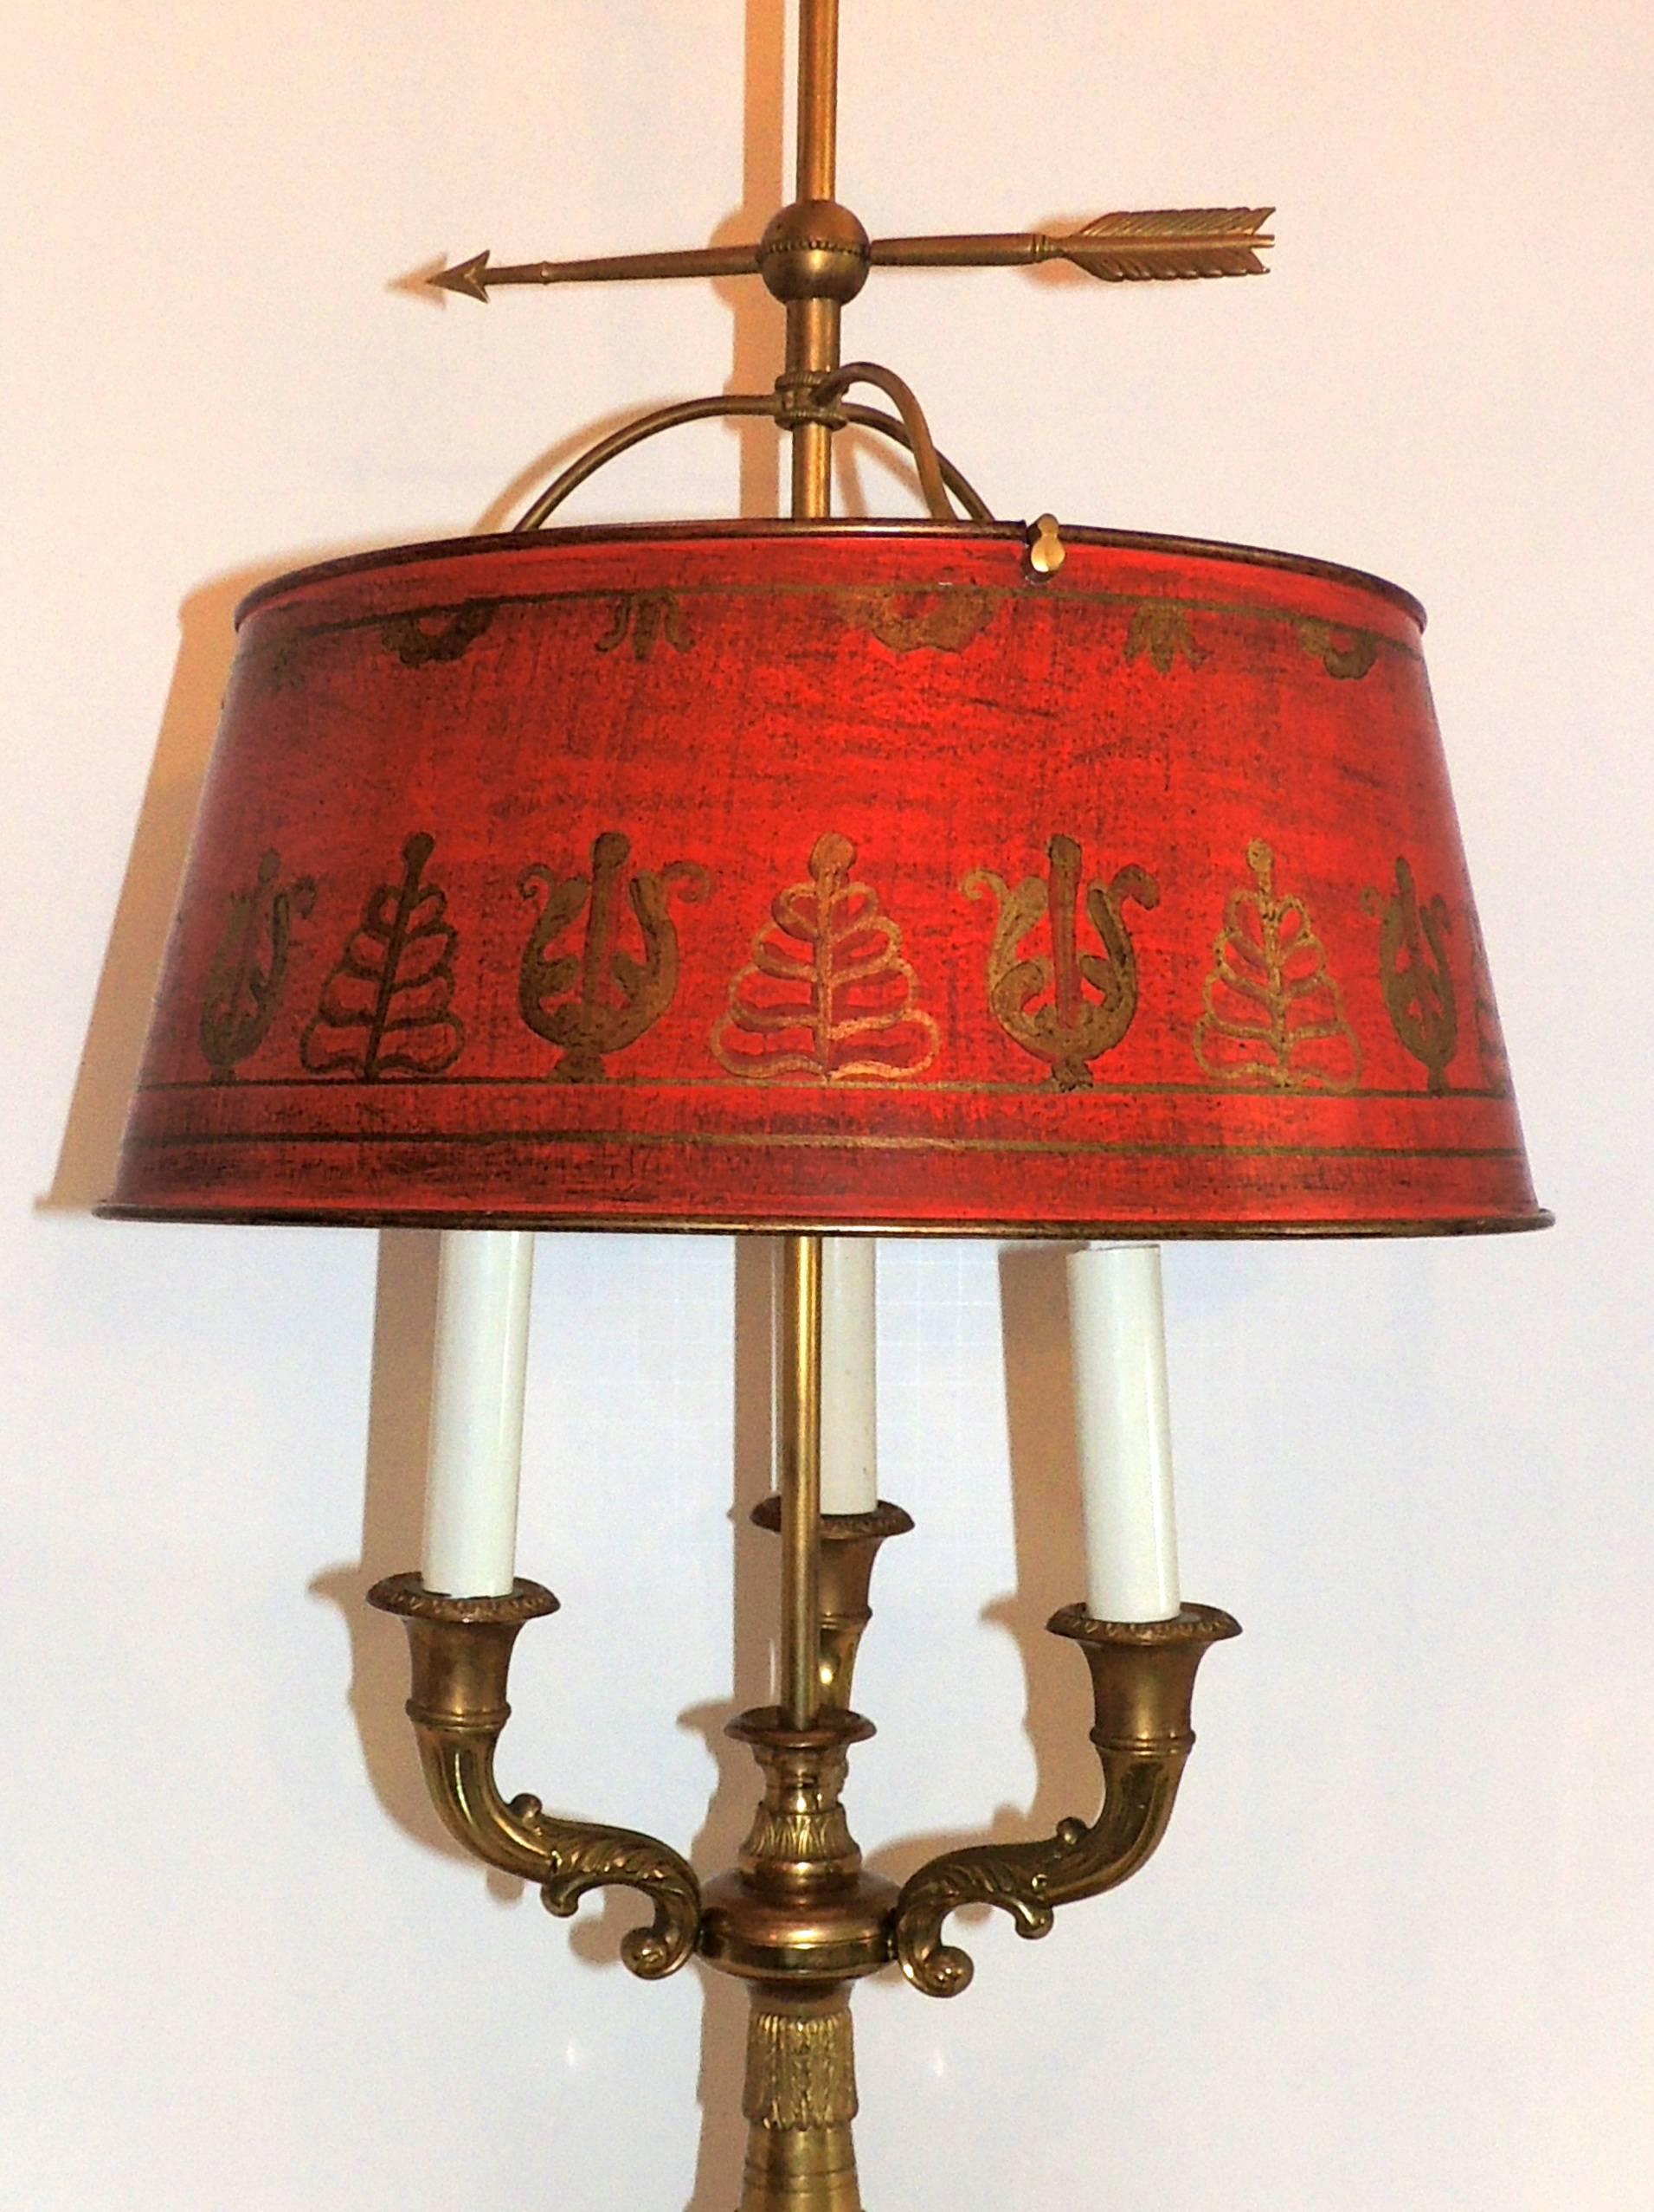 A wonderful French bronze neoclassical bouillotte lamp with three lights and decorated red tole shade in the Regency motif.